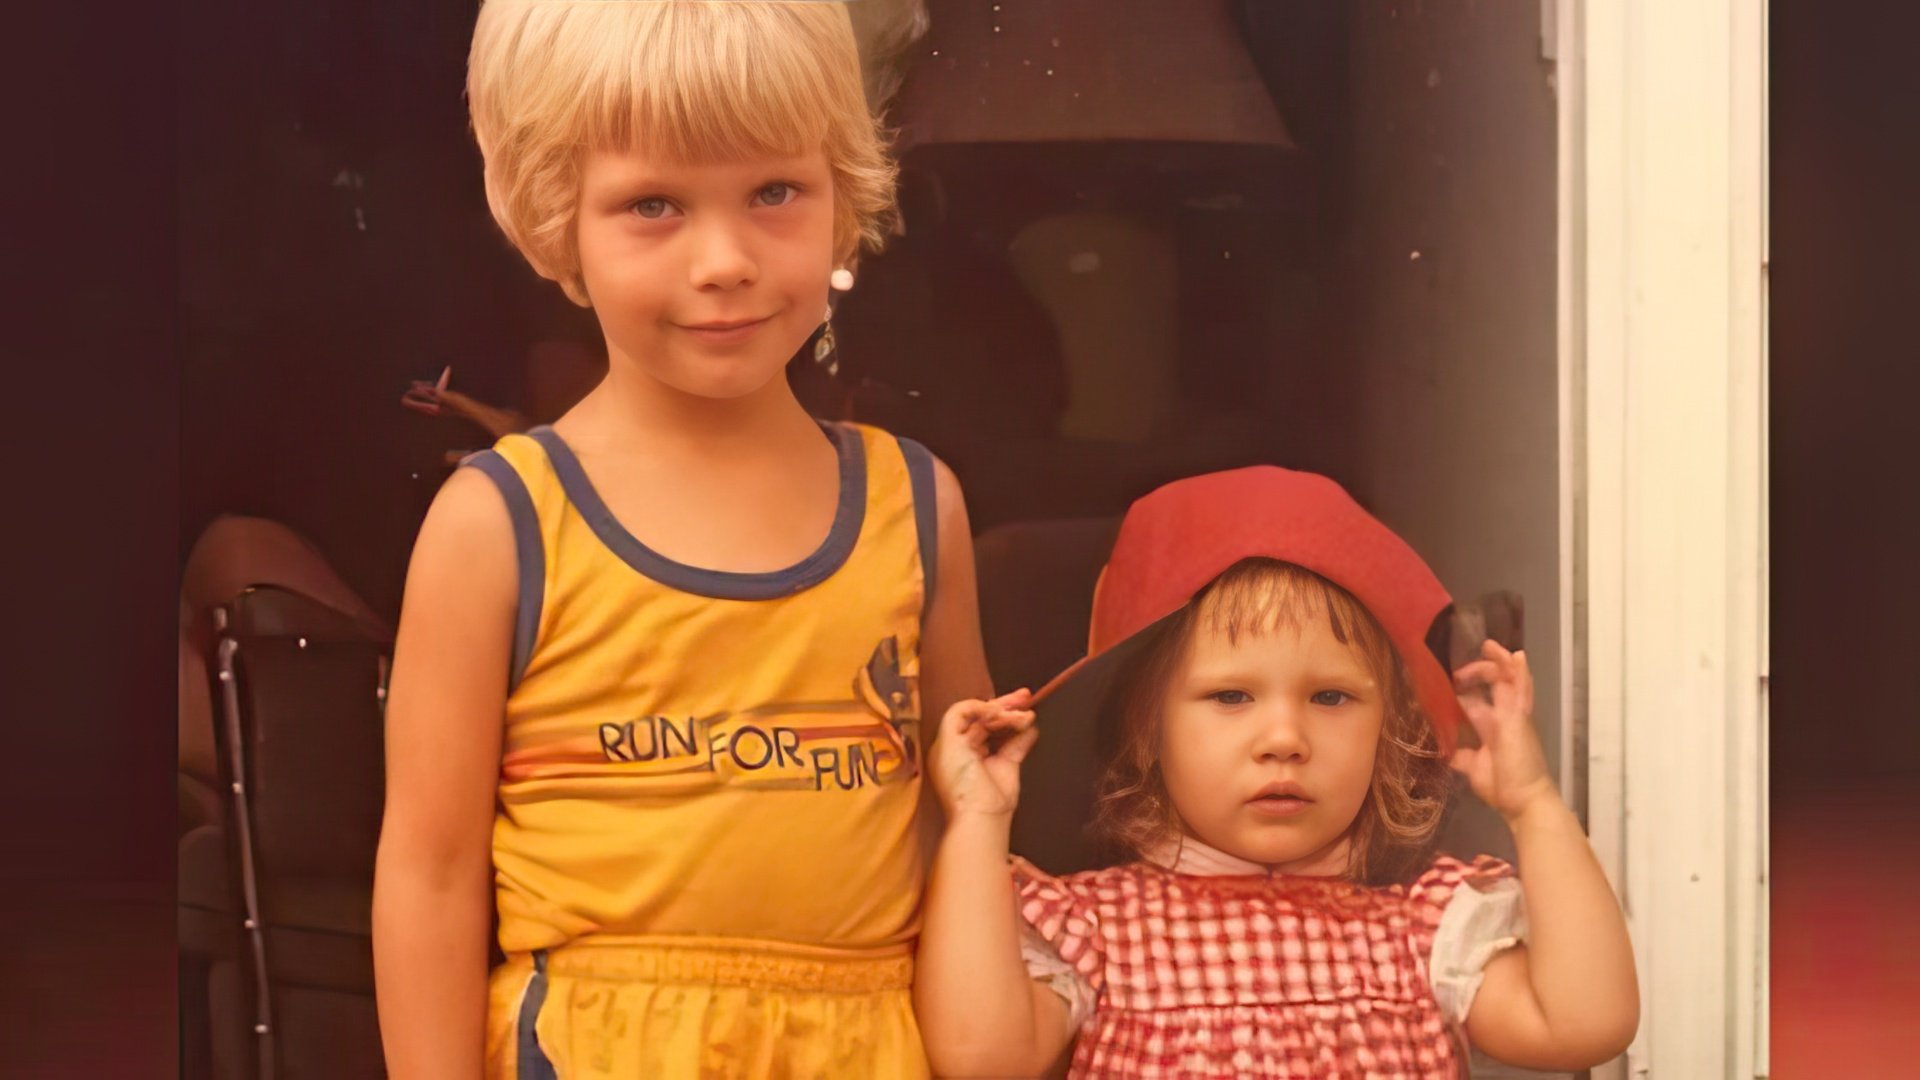 Katheryn Winnick in childhood (with her brother in the photo)